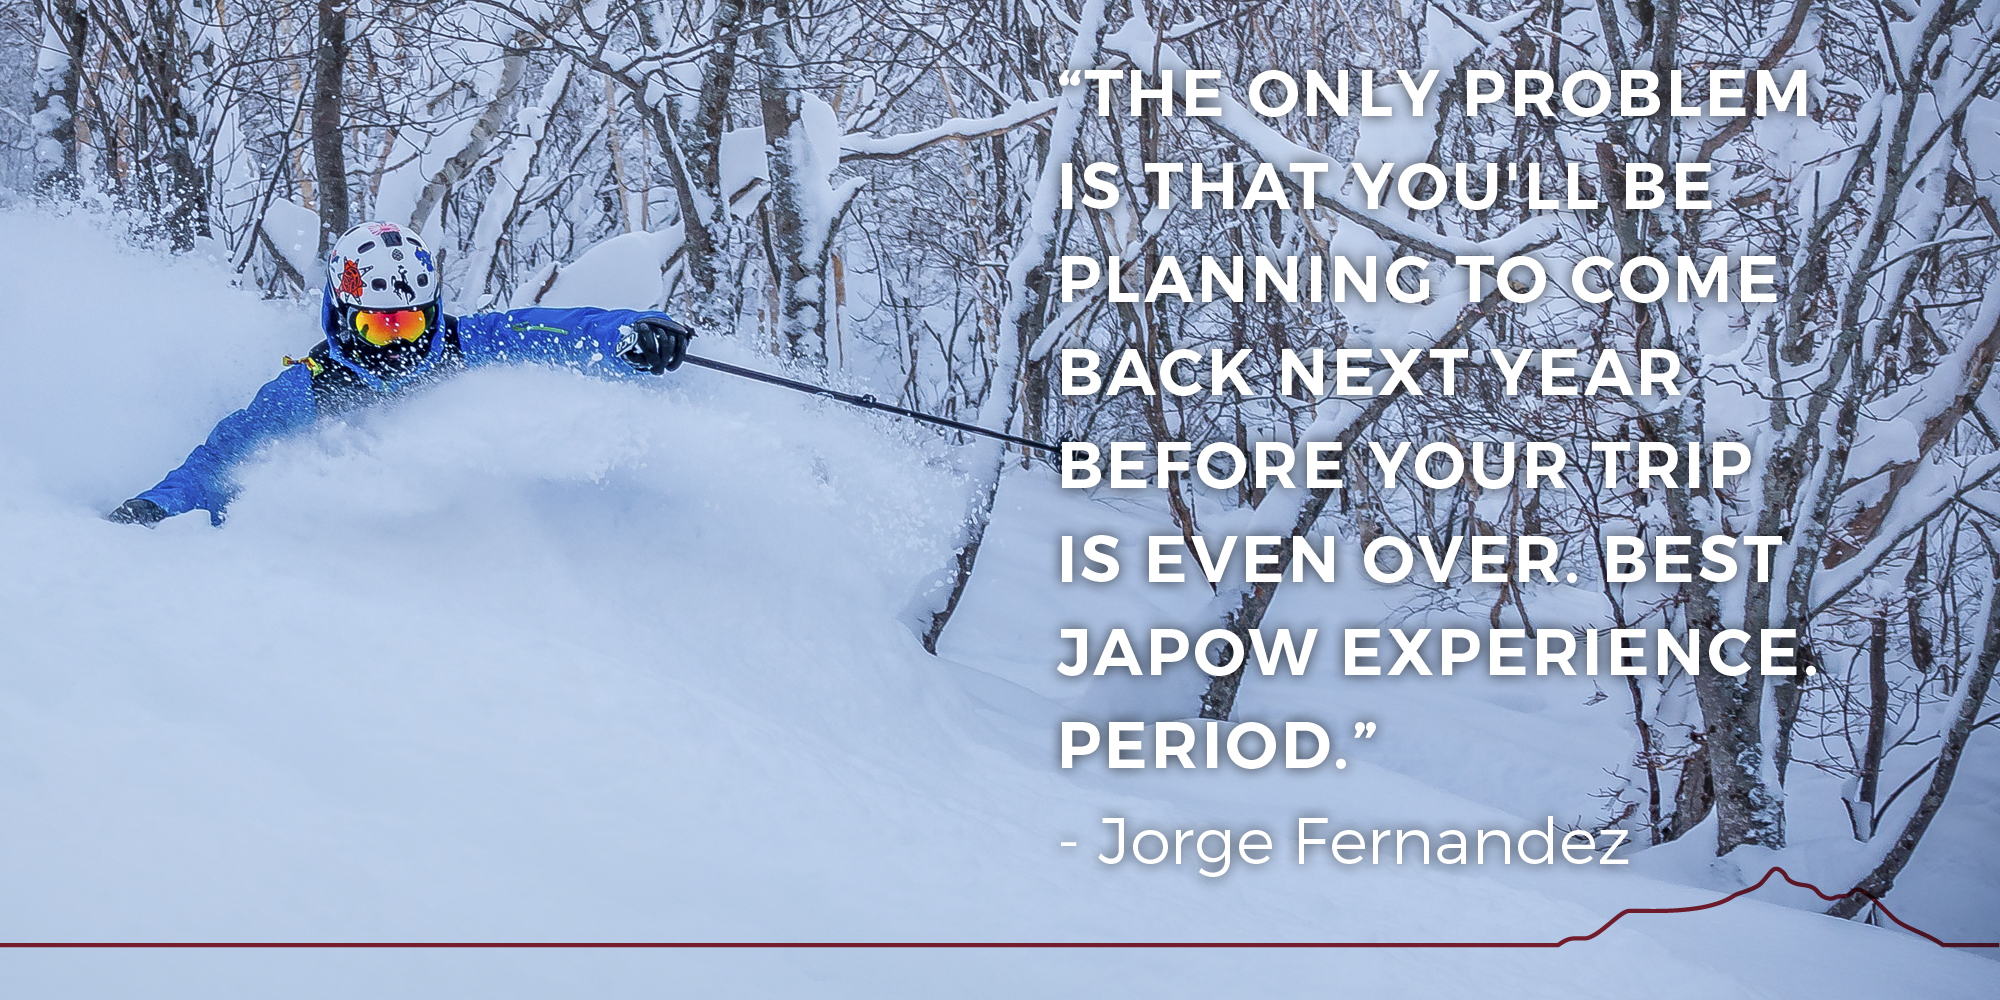 The only problem is that you'll be planning to come back next year before your trip is even over. Best JaPow experience. Period. -- Jorge Fernandez